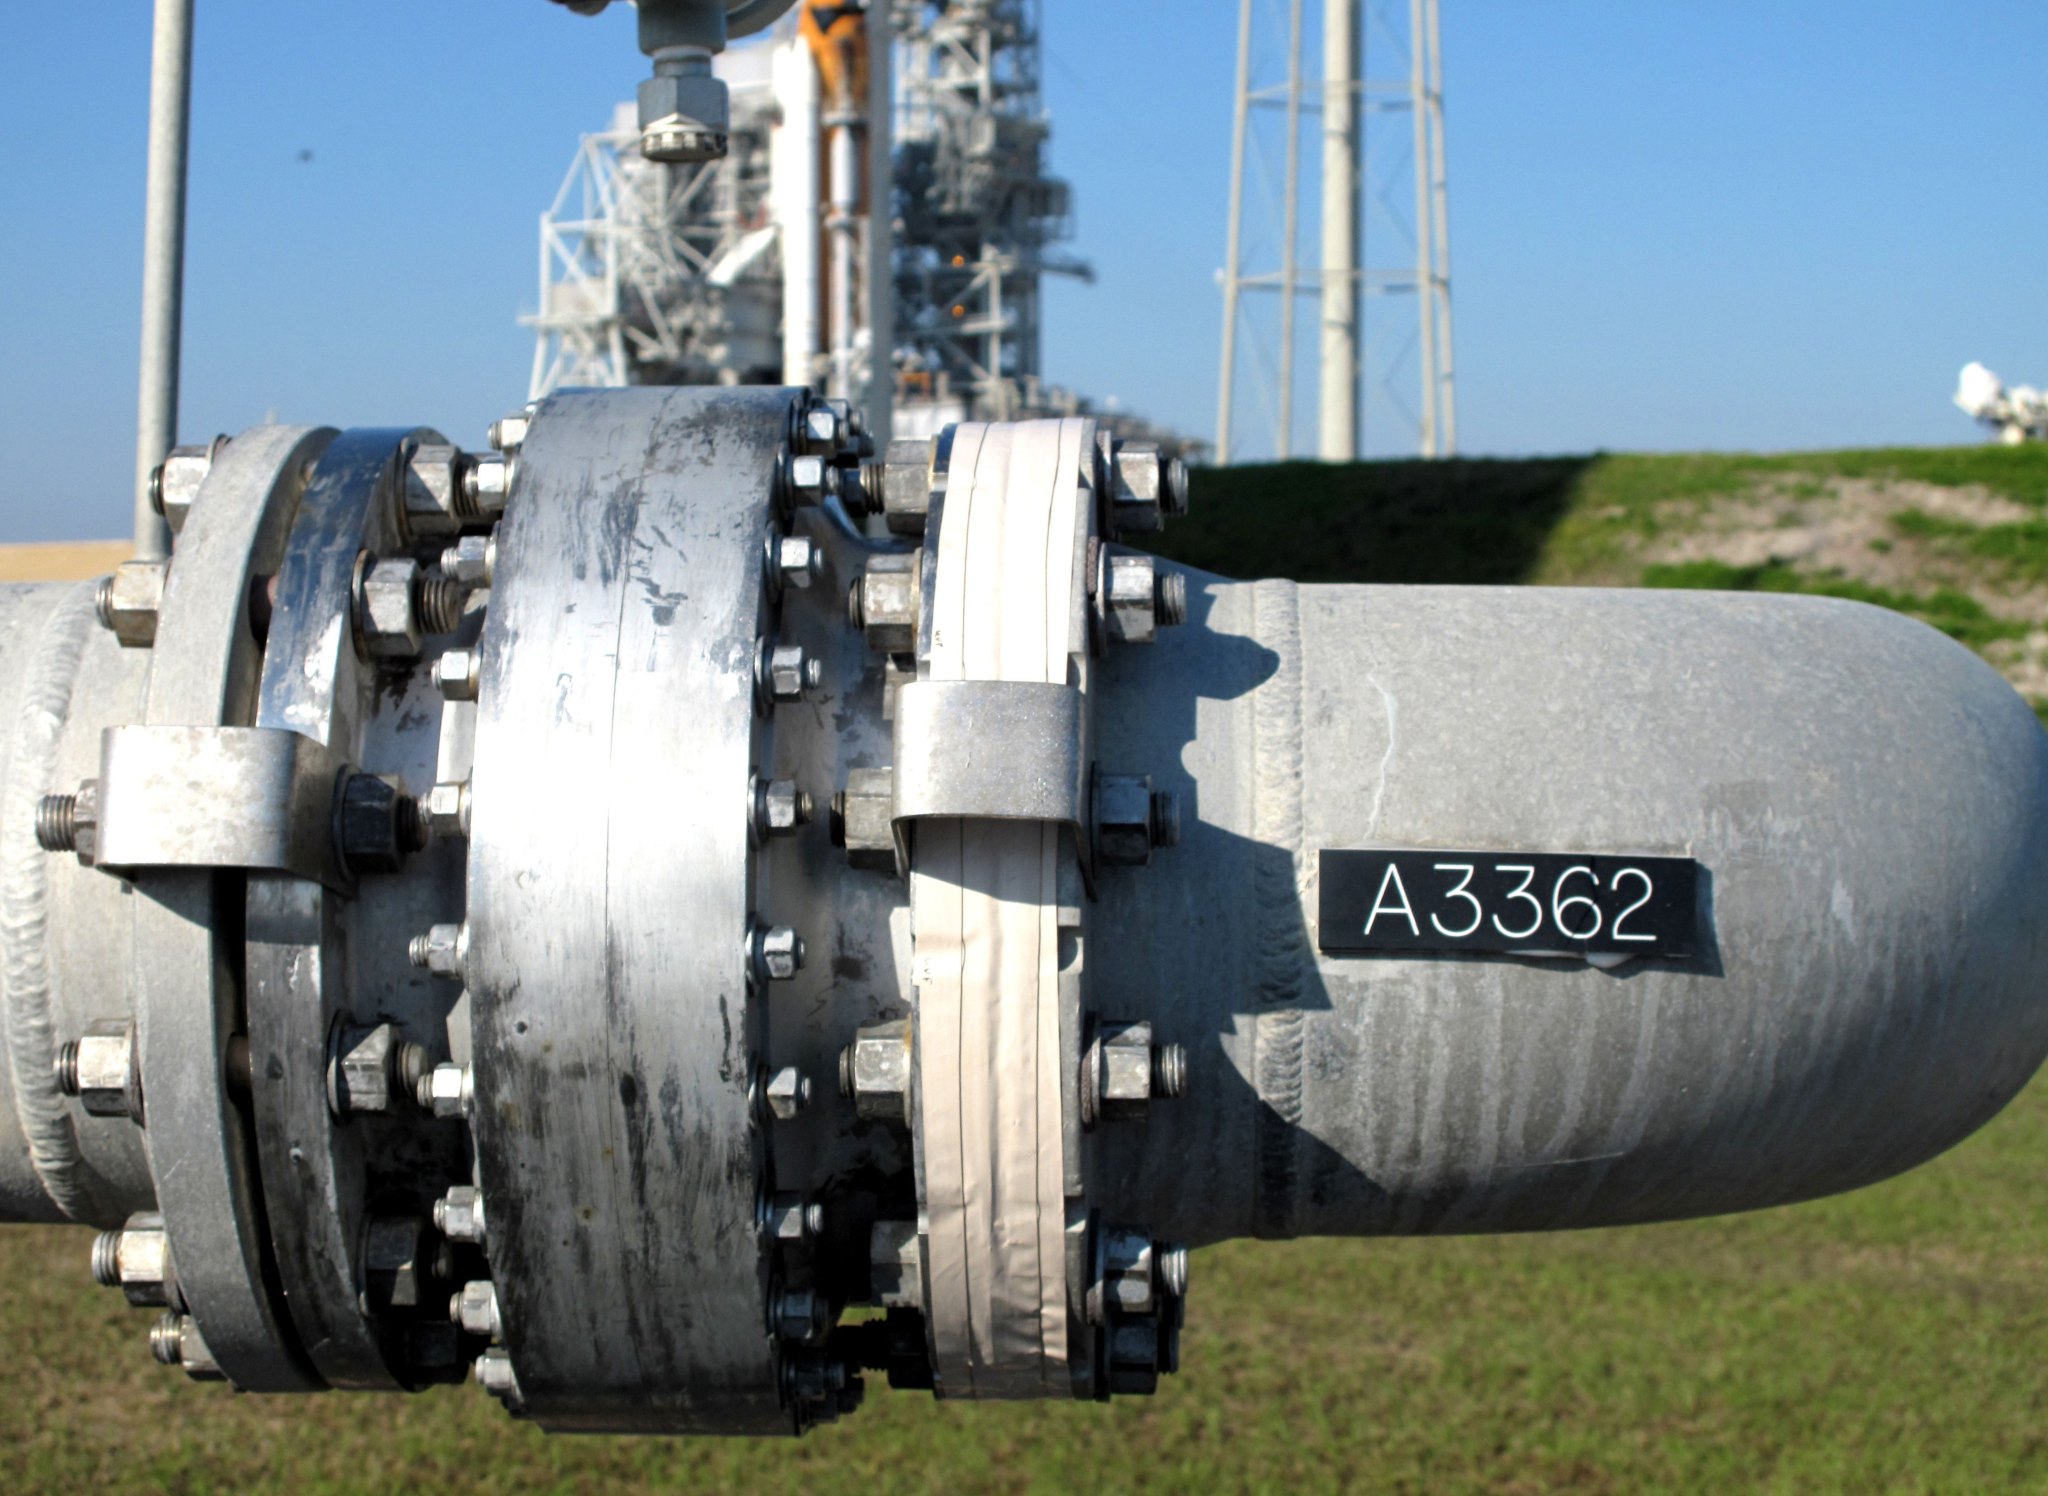 A liquid hydrogen feed line at Kennedy Space Center's Launch Pad 39A.